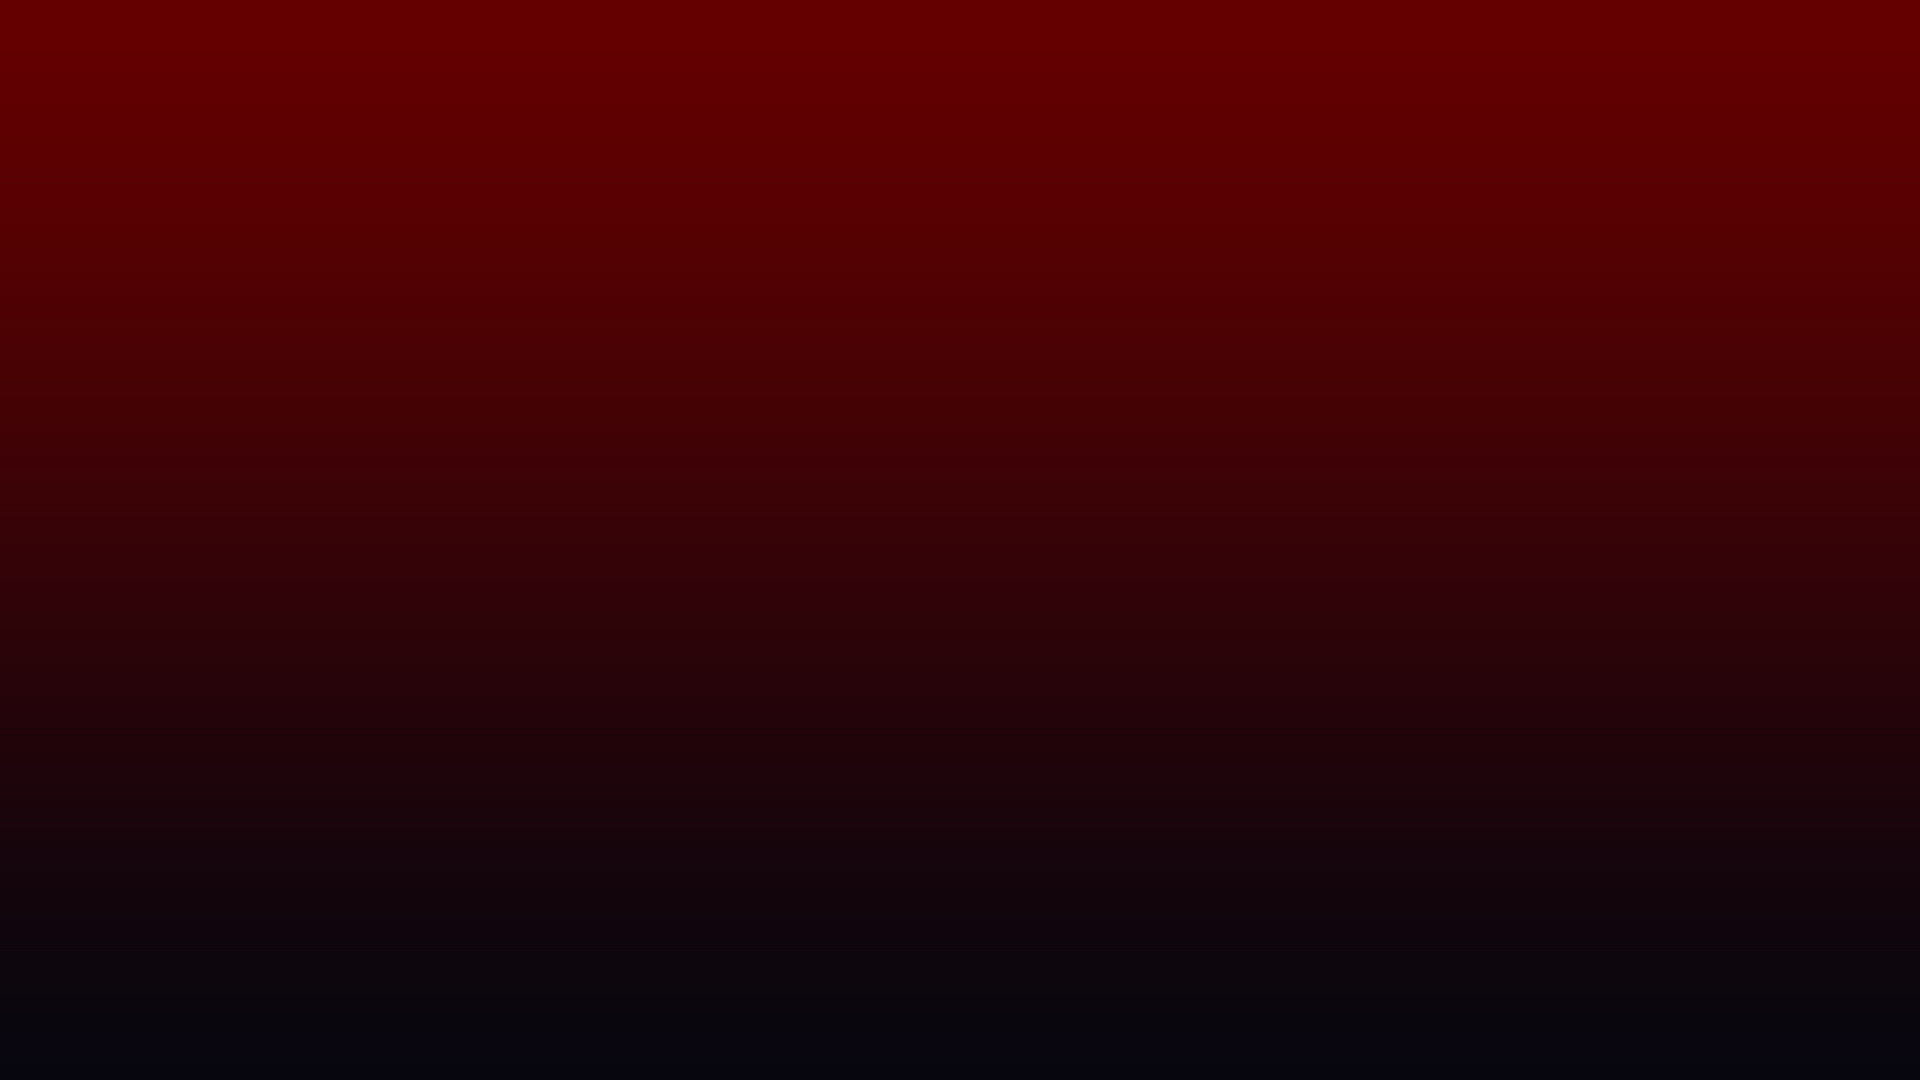 1920x1080, Dark Red And Black Gradient Wallpaper 63437 - Red Black Gradient  Background - 1920x1080 Wallpaper 